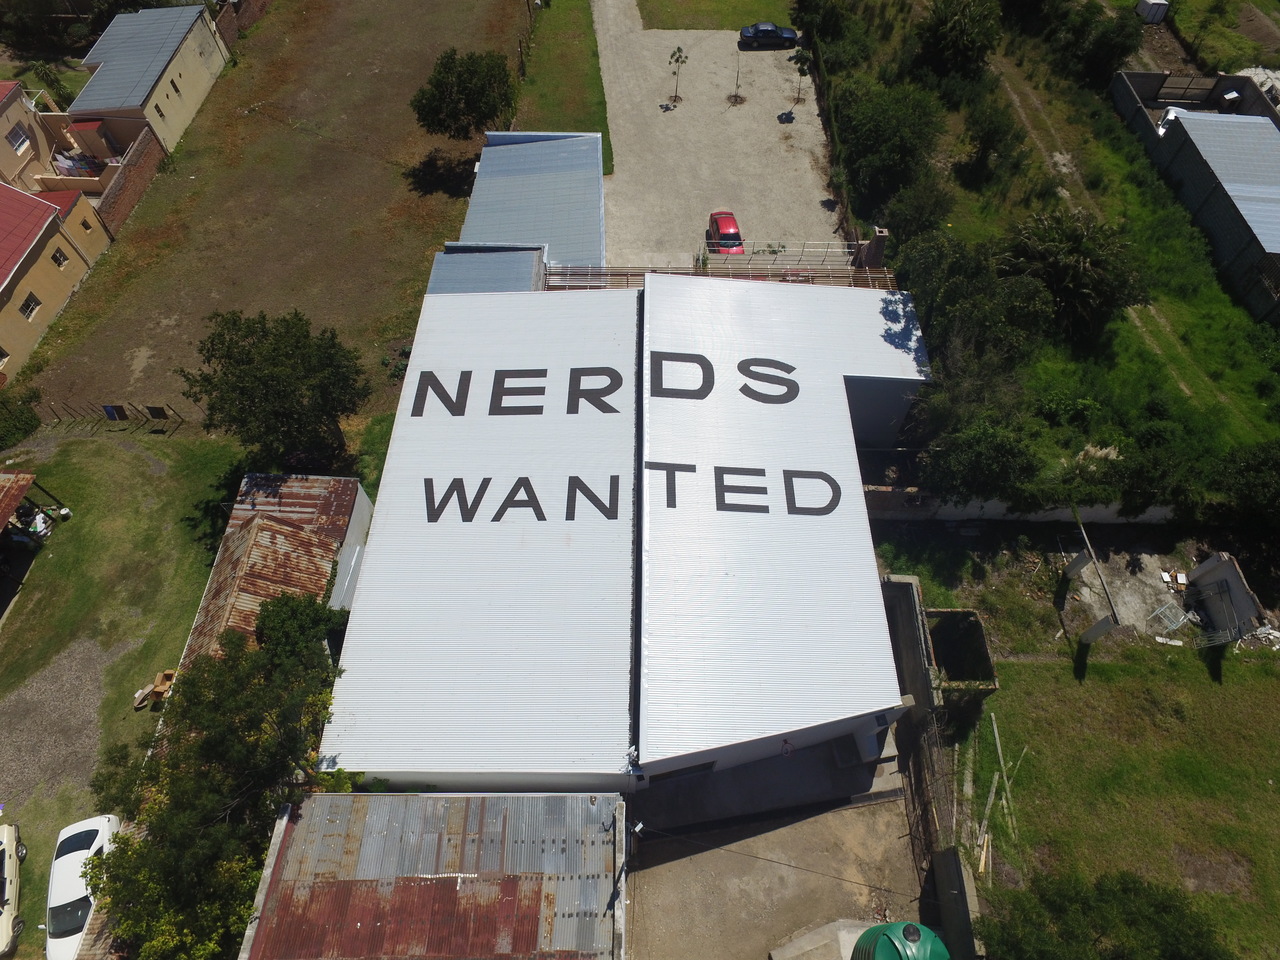 Piehole.tv launches Nerd academy programme in the Karoo